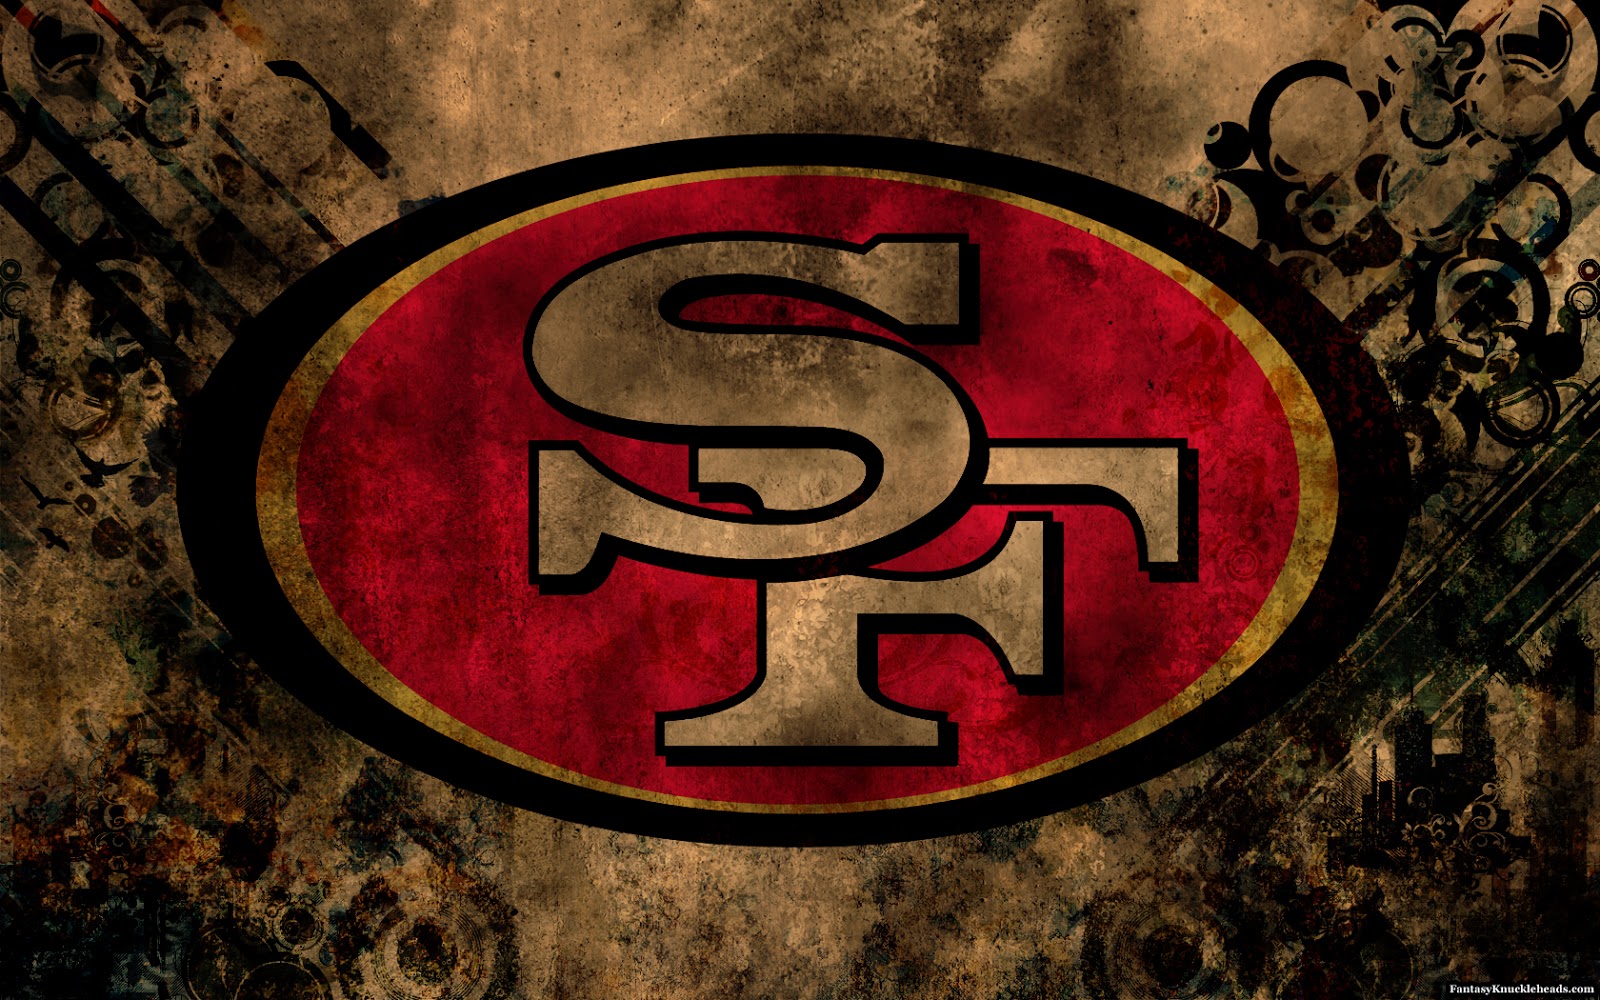 This San Francisco 49ers Wallpaper HD Image Is One Of